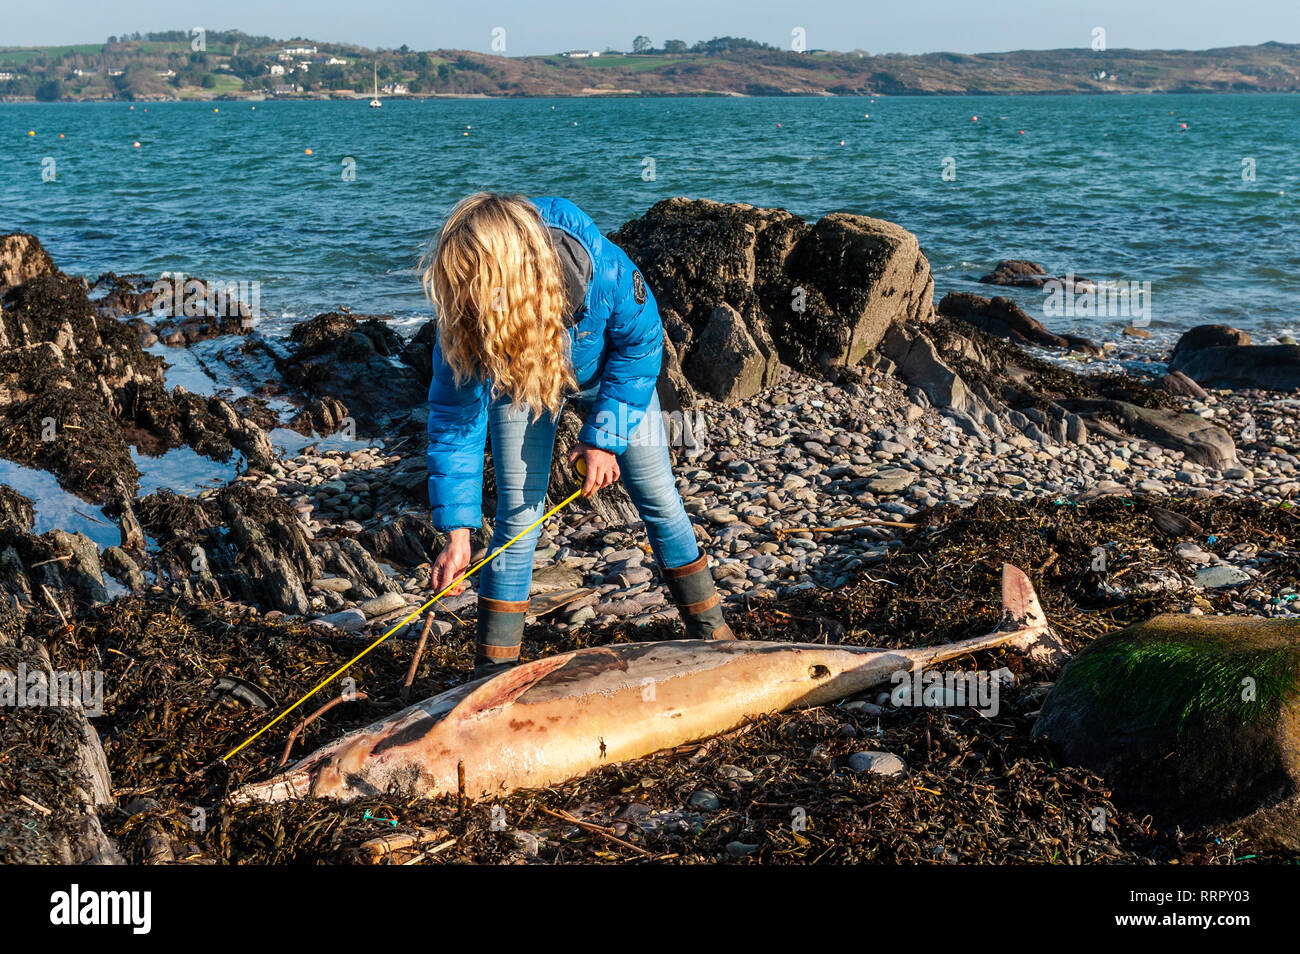 Schull, West Cork, Ireland. 26th Feb, 2019. A dead dolphin was found on Schull beach today with fishing line around its beak. Helen Tilson of Schull Sea Safari measured the animal, which was a mature adult and 2 metres long. The Irish Whale and Dolphin Group has been called and will perform a post mortem to find out the cause of death. Credit: Andy Gibson/Alamy Live News. Stock Photo